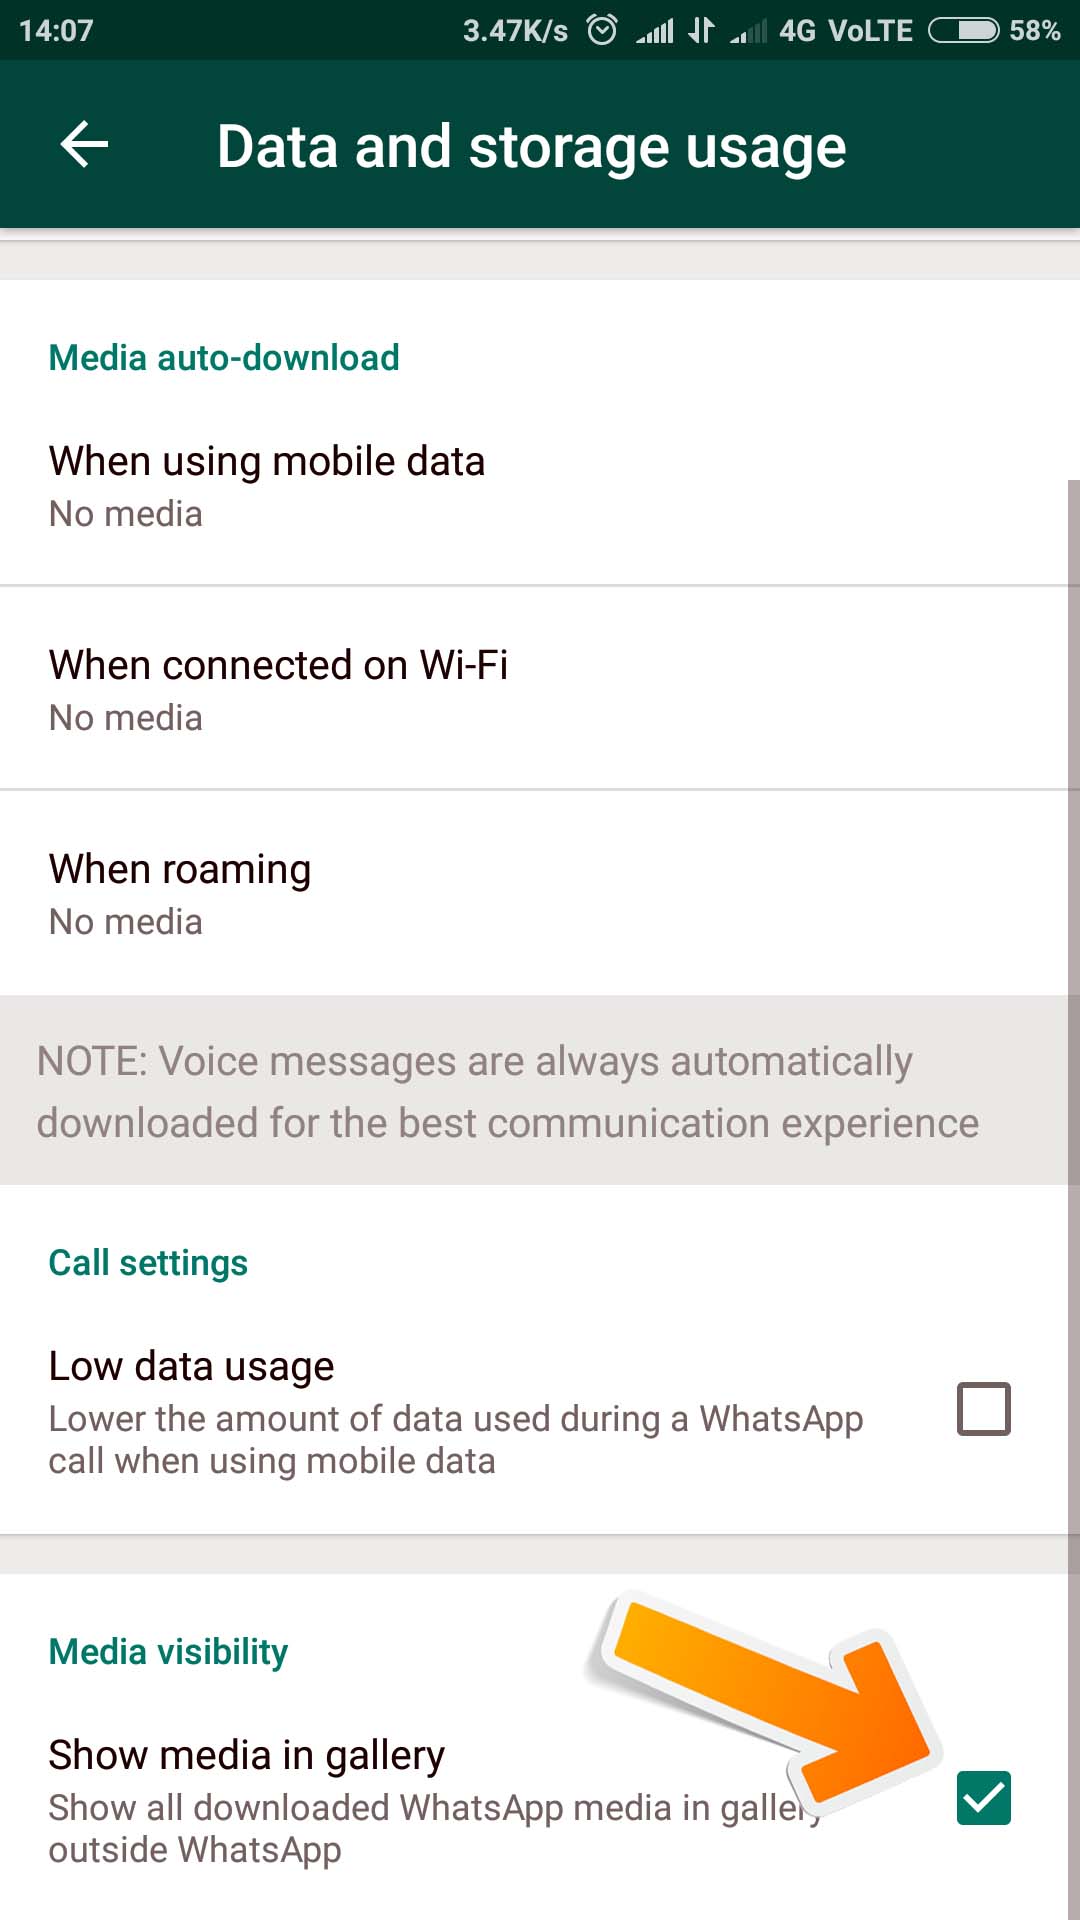 Uncheck it to hide WhatsApp Photos and Videos media from Gallery.